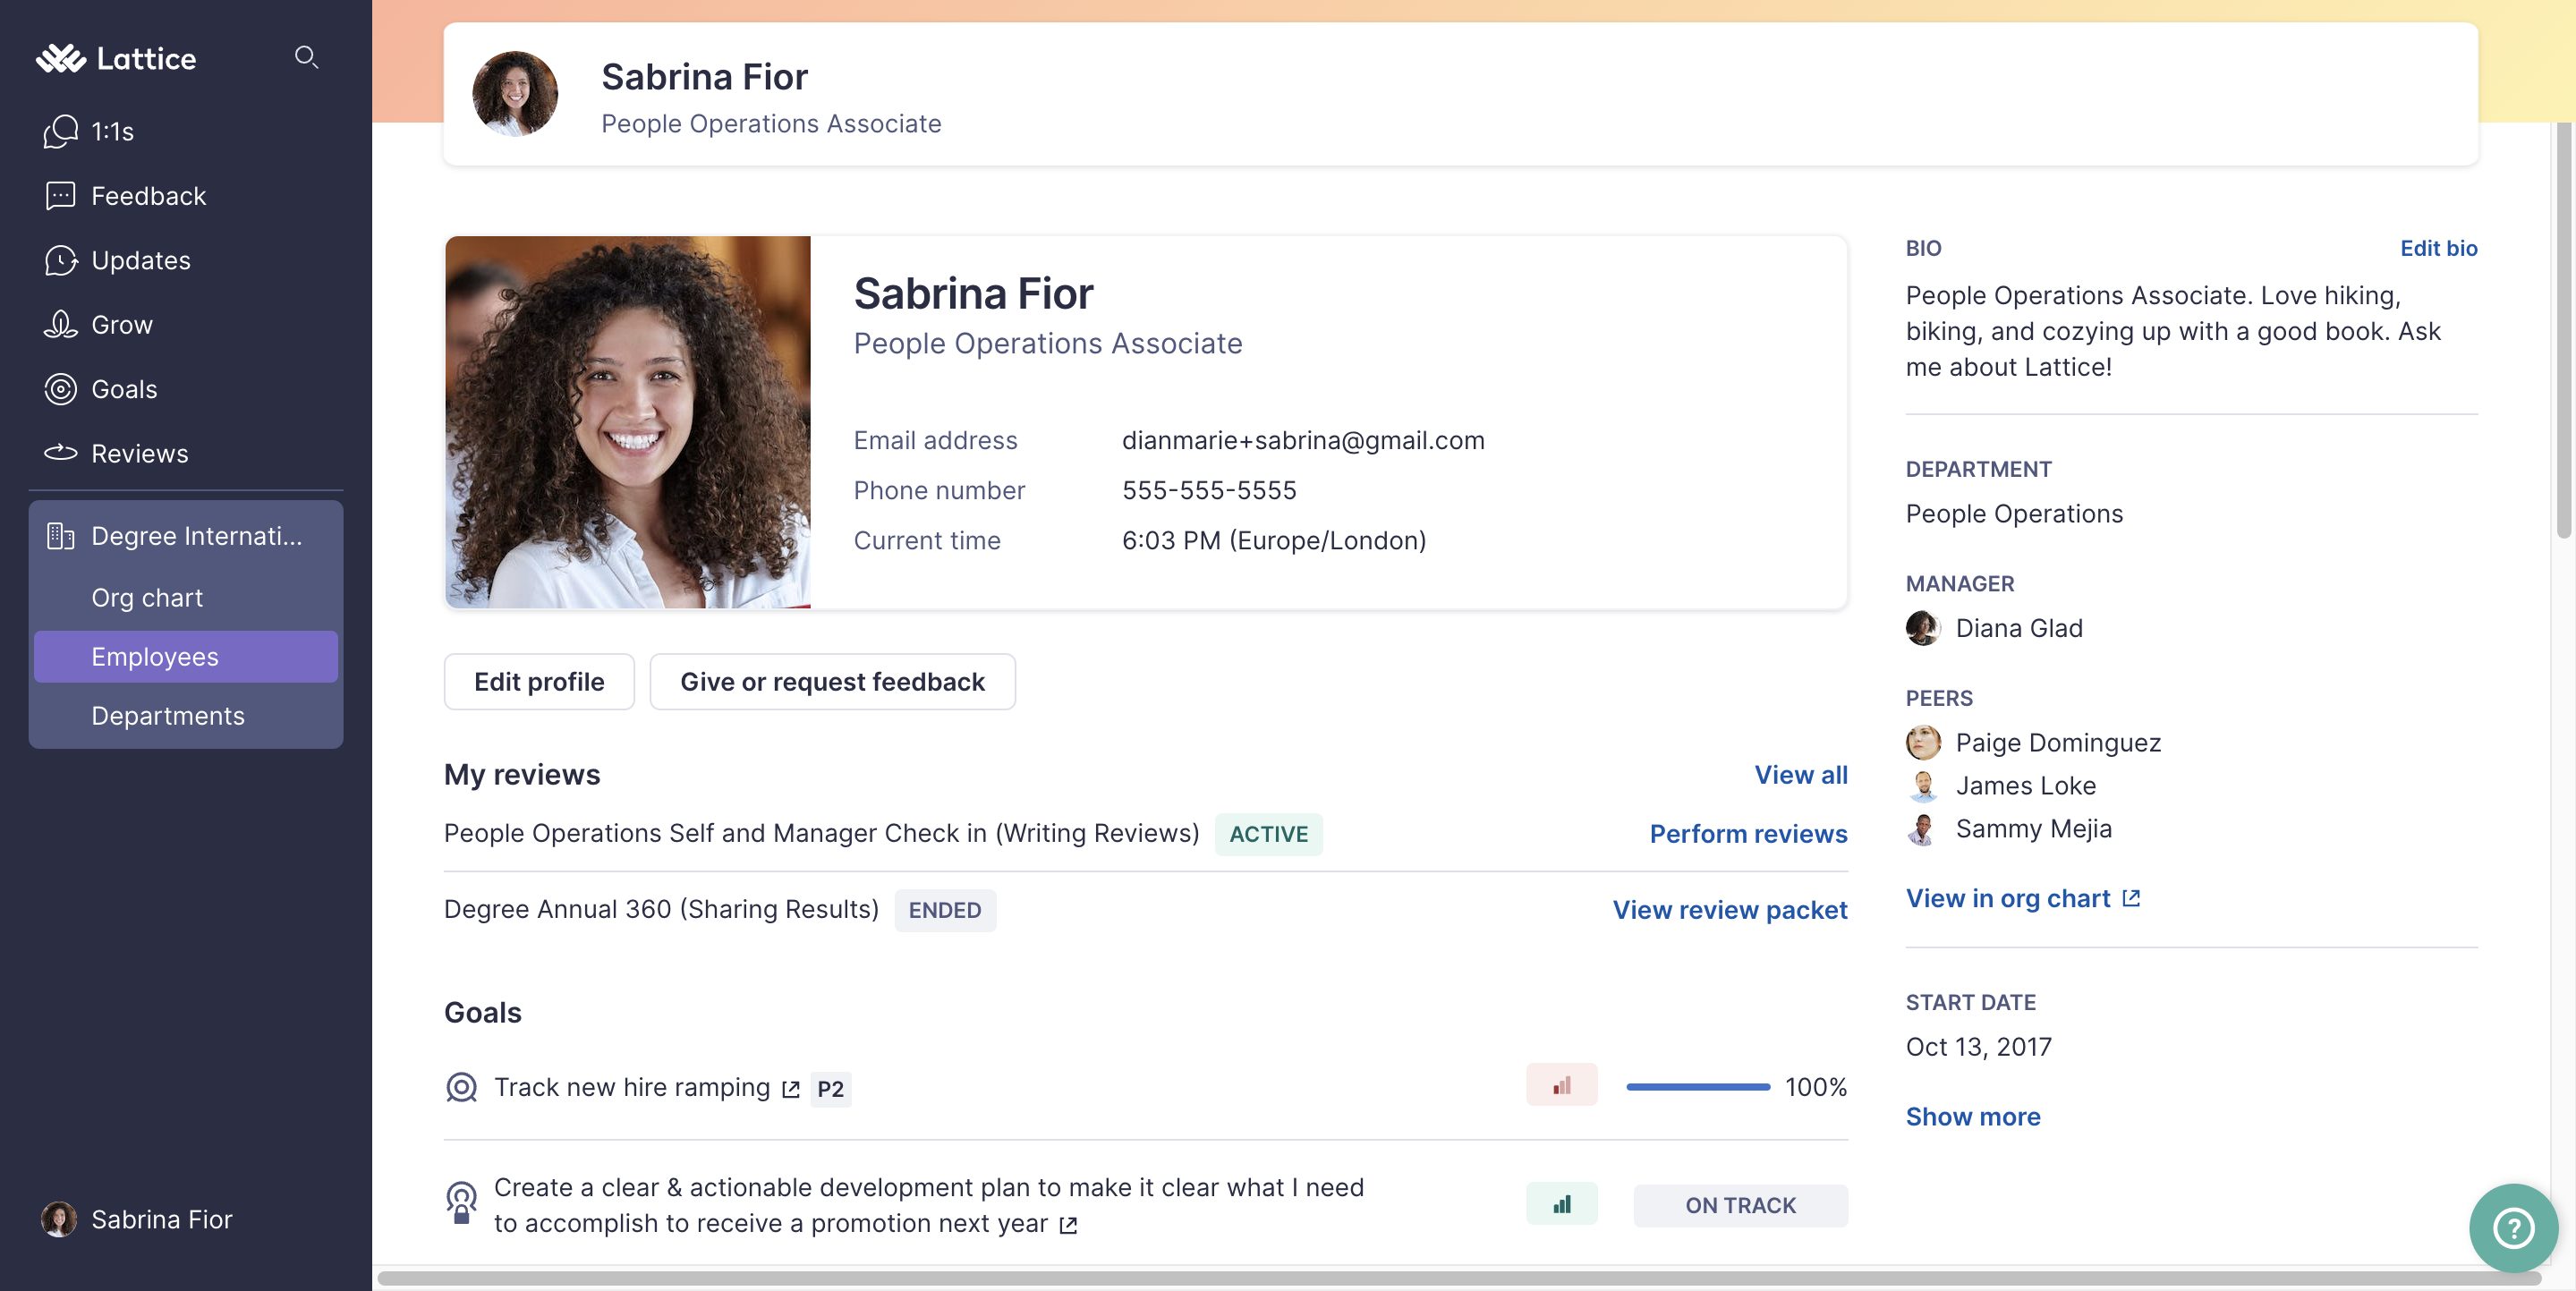 Employee profile page for Sabrina Fior. A profile card that includes a profile picture, name, role, email, phone number, and timezone can be seen at the top of the page.